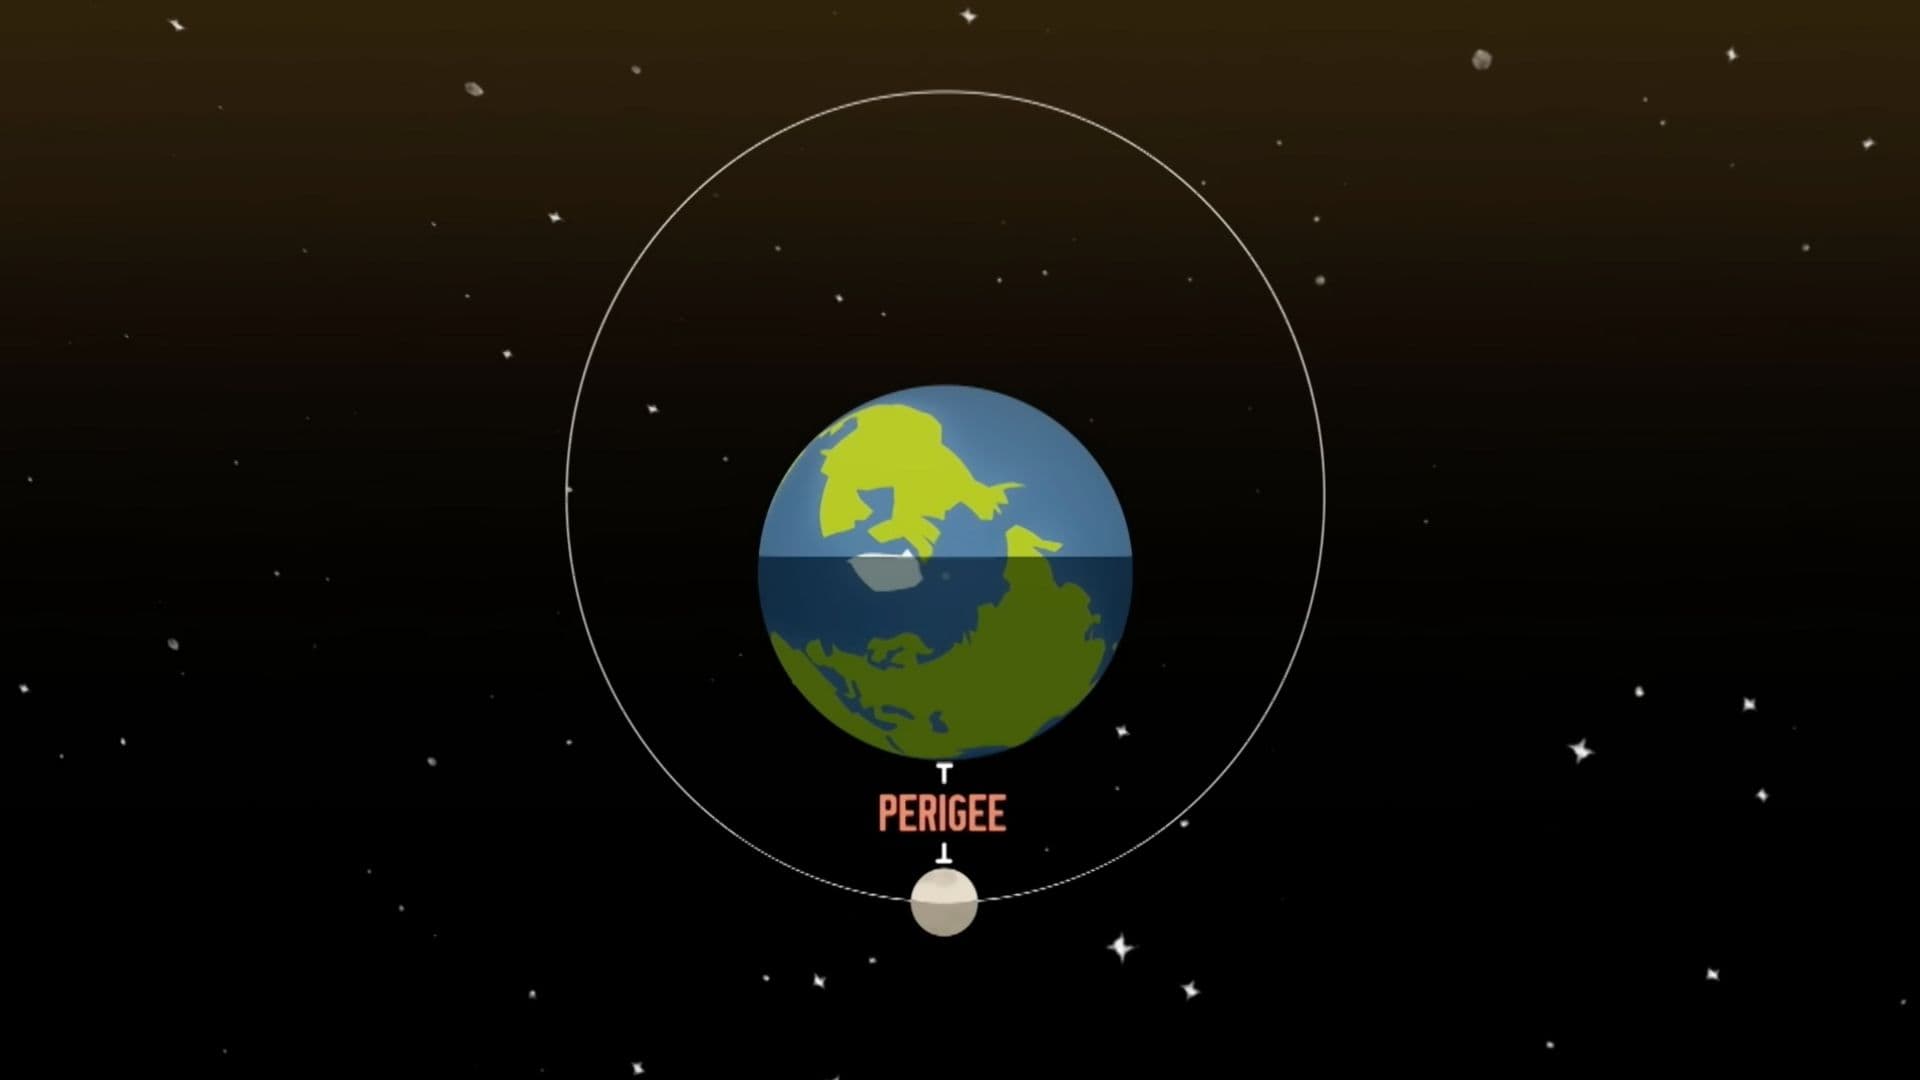 The moon at perigee